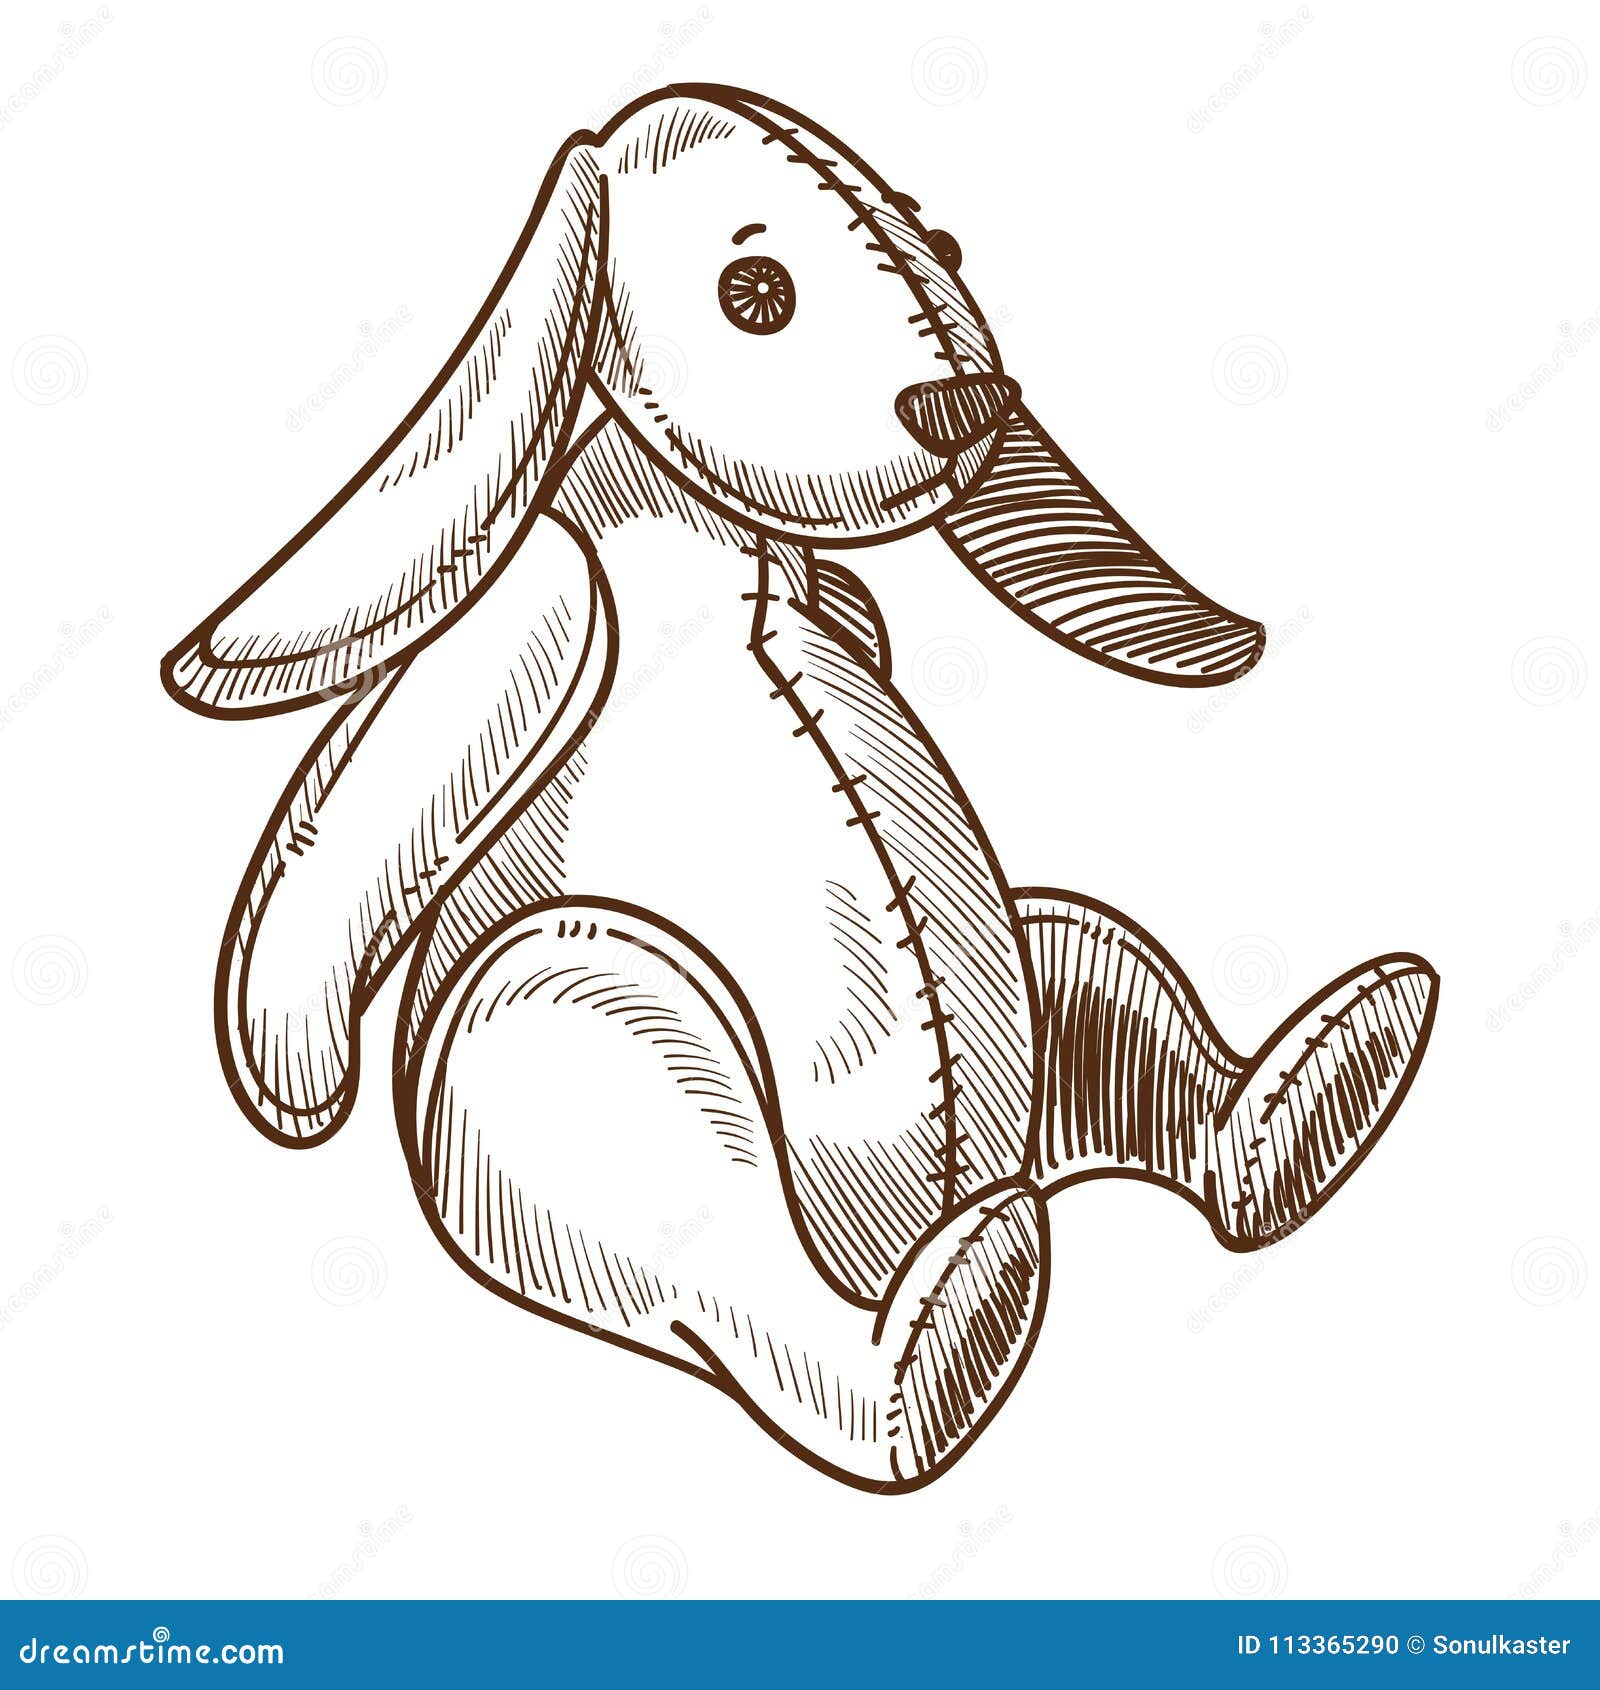 How to Draw a Realistic Bunny Rabbit